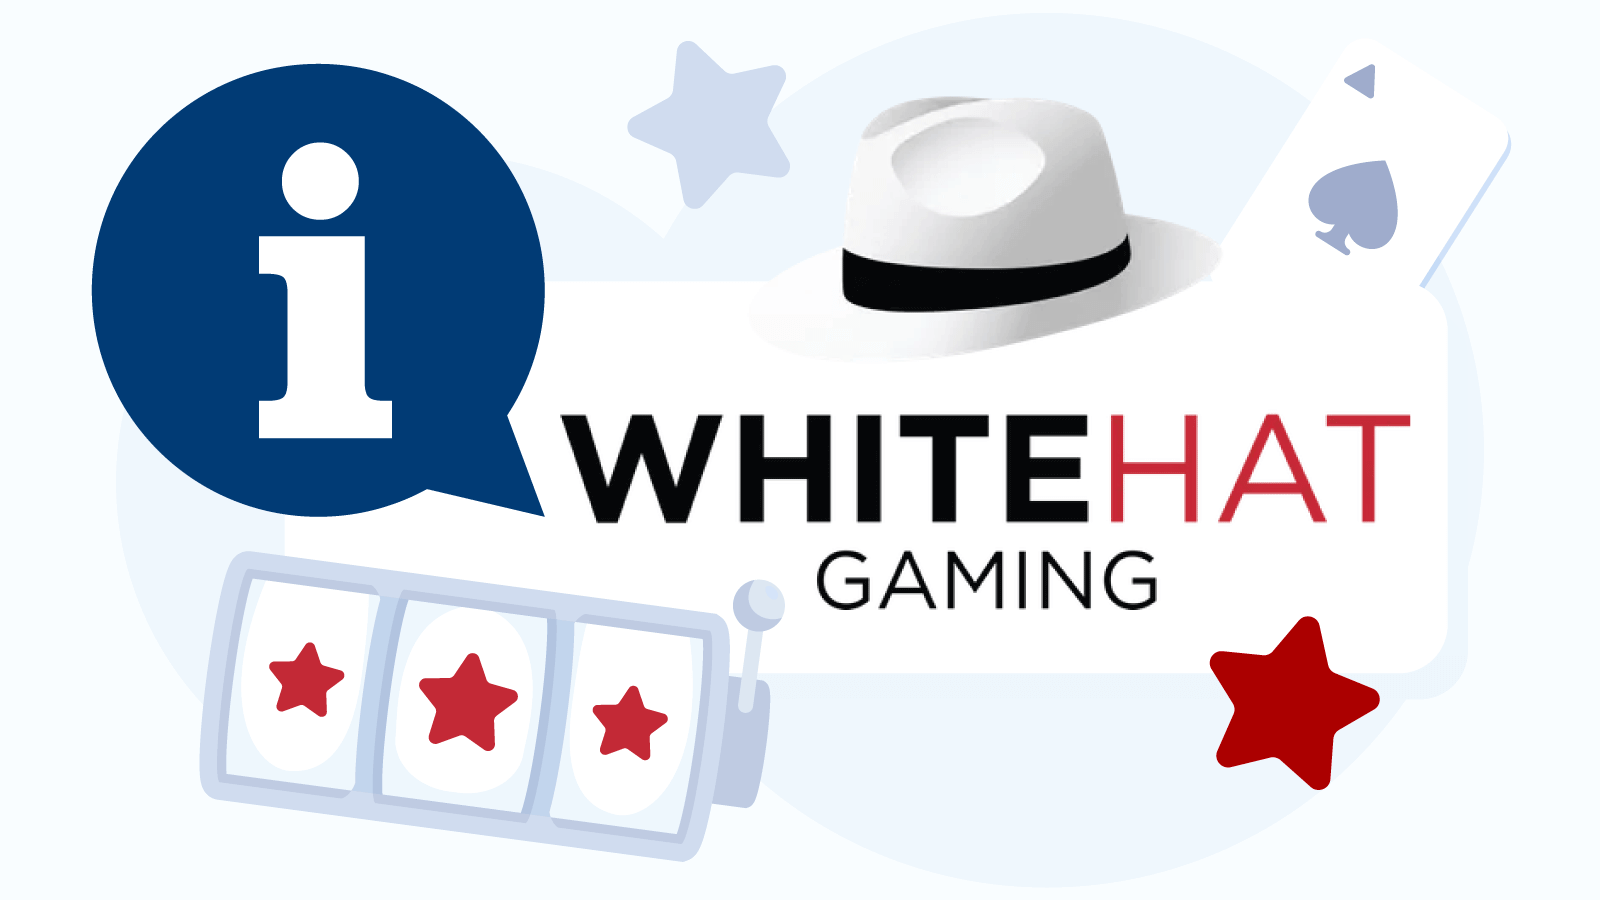 Who is the White Hat Gaming Platform